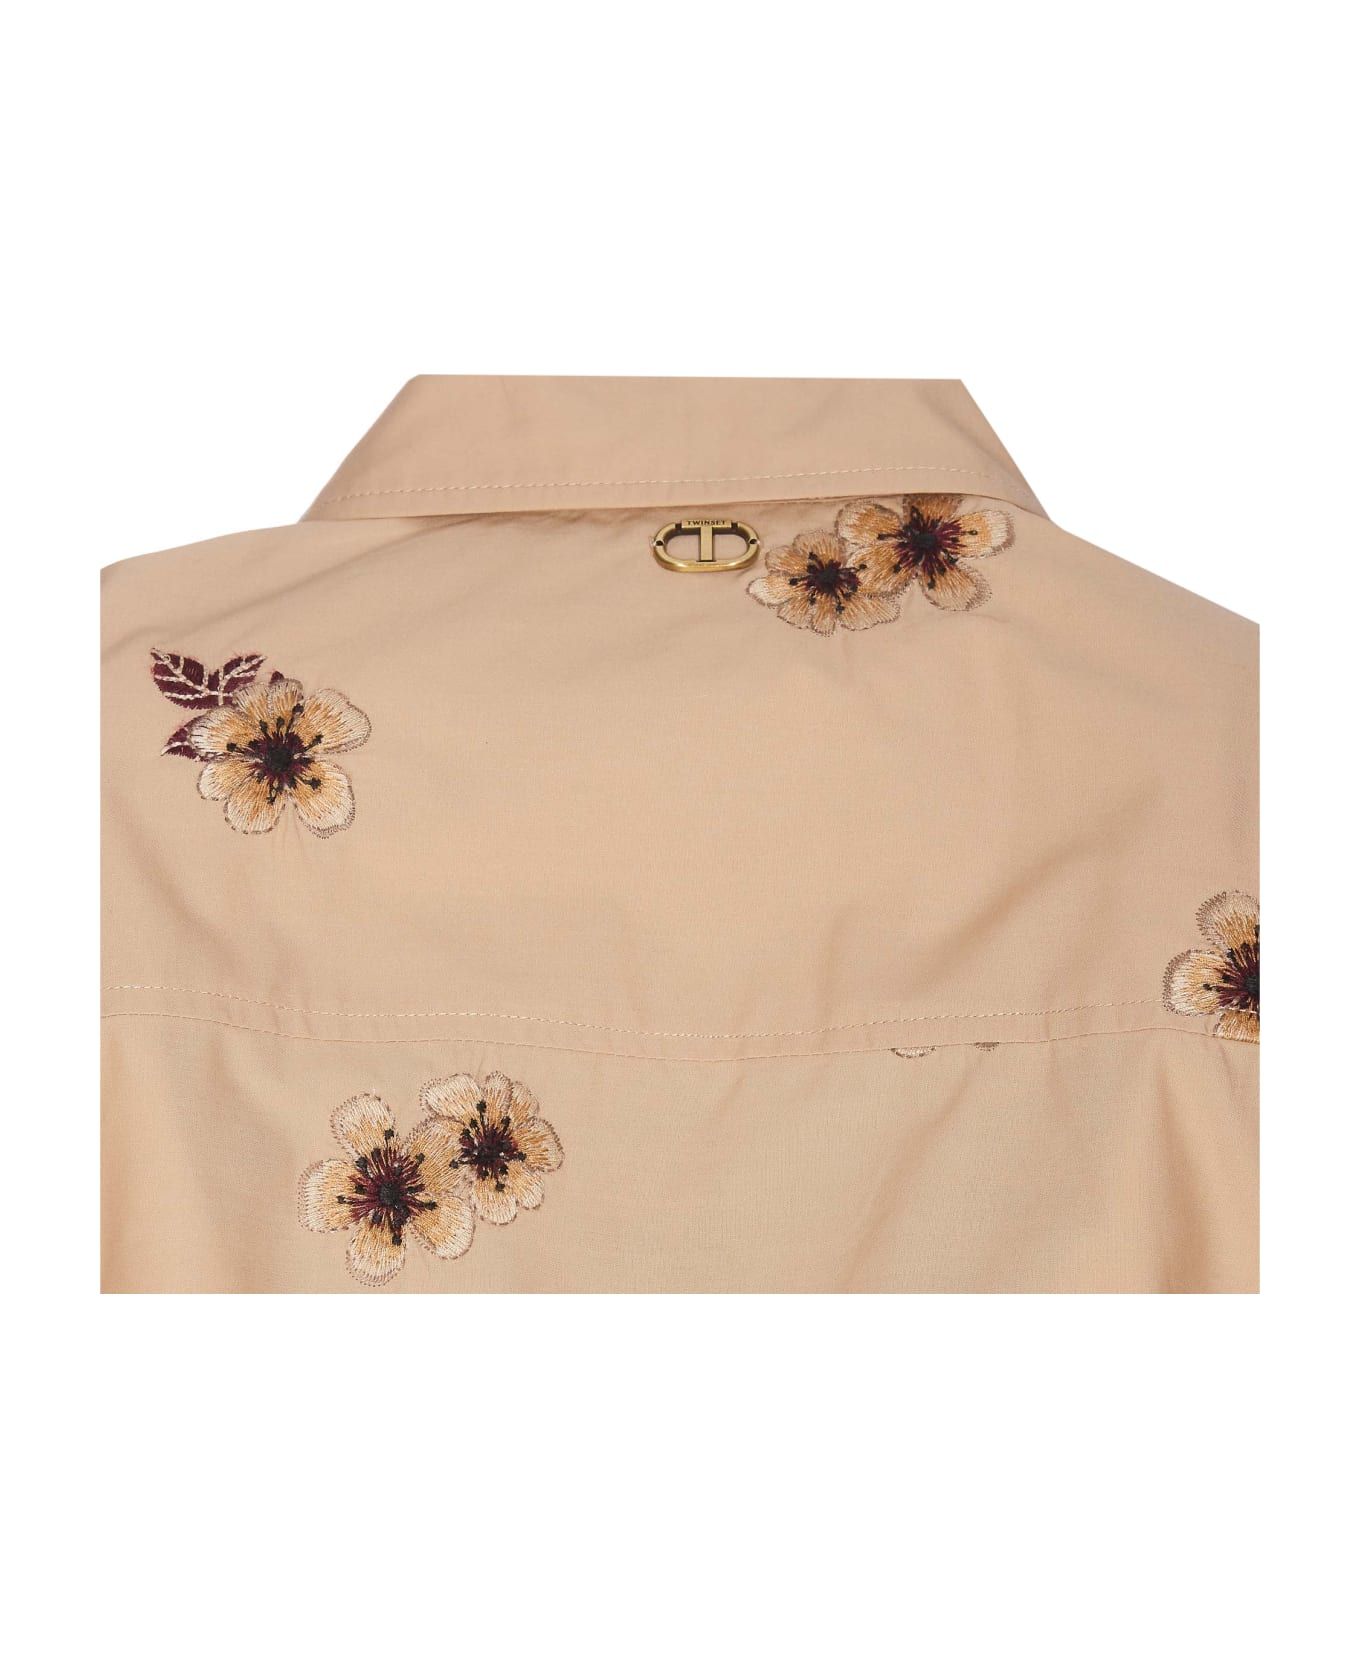 TwinSet Popeline Embroidered Shirt - Beige